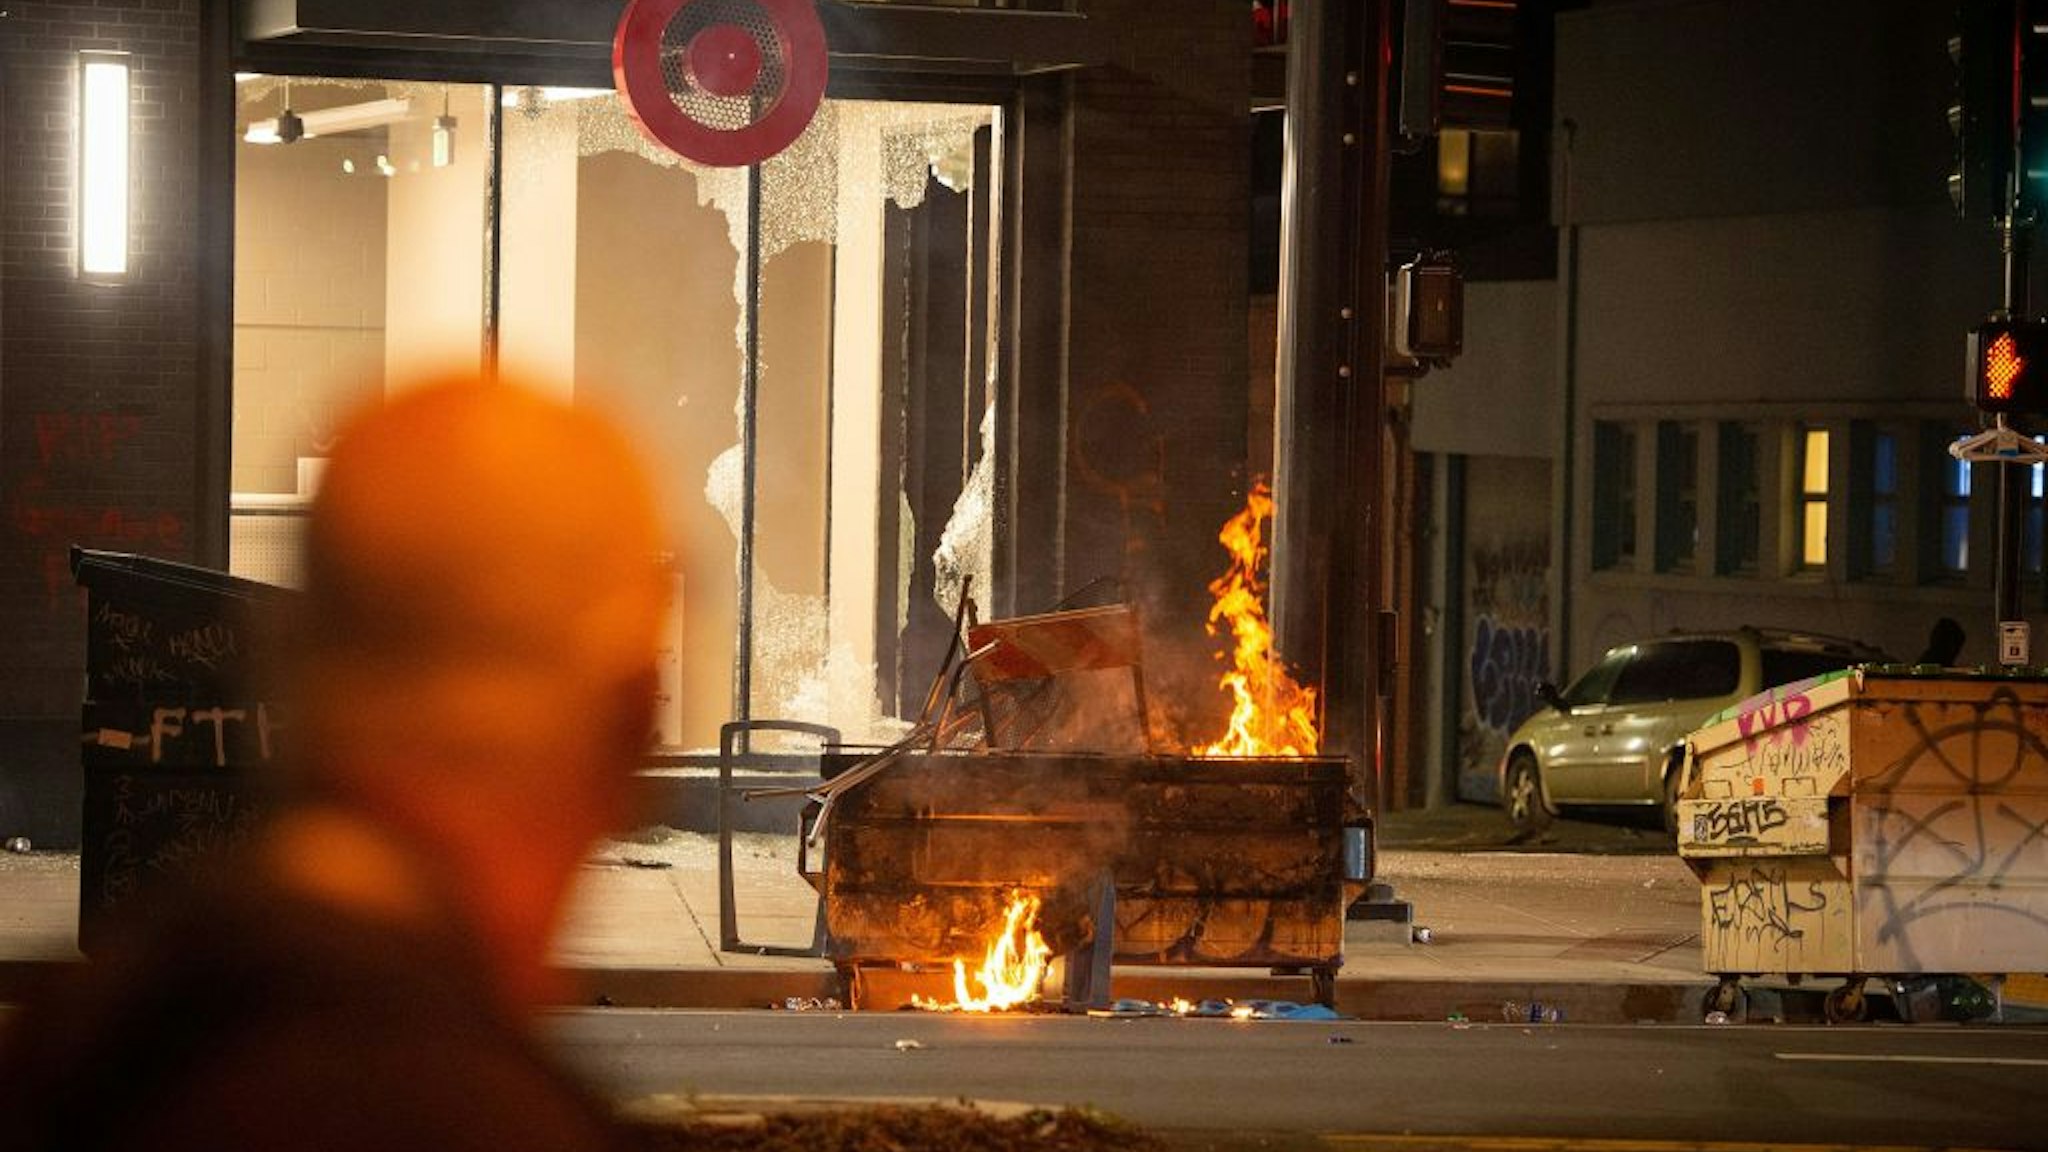 A dumpster is lit on fire infront of a Target store in Oakland California on May 30, 2020, over the death of George Floyd, a black man who died after a white policeman kneeled on his neck for several minutes.